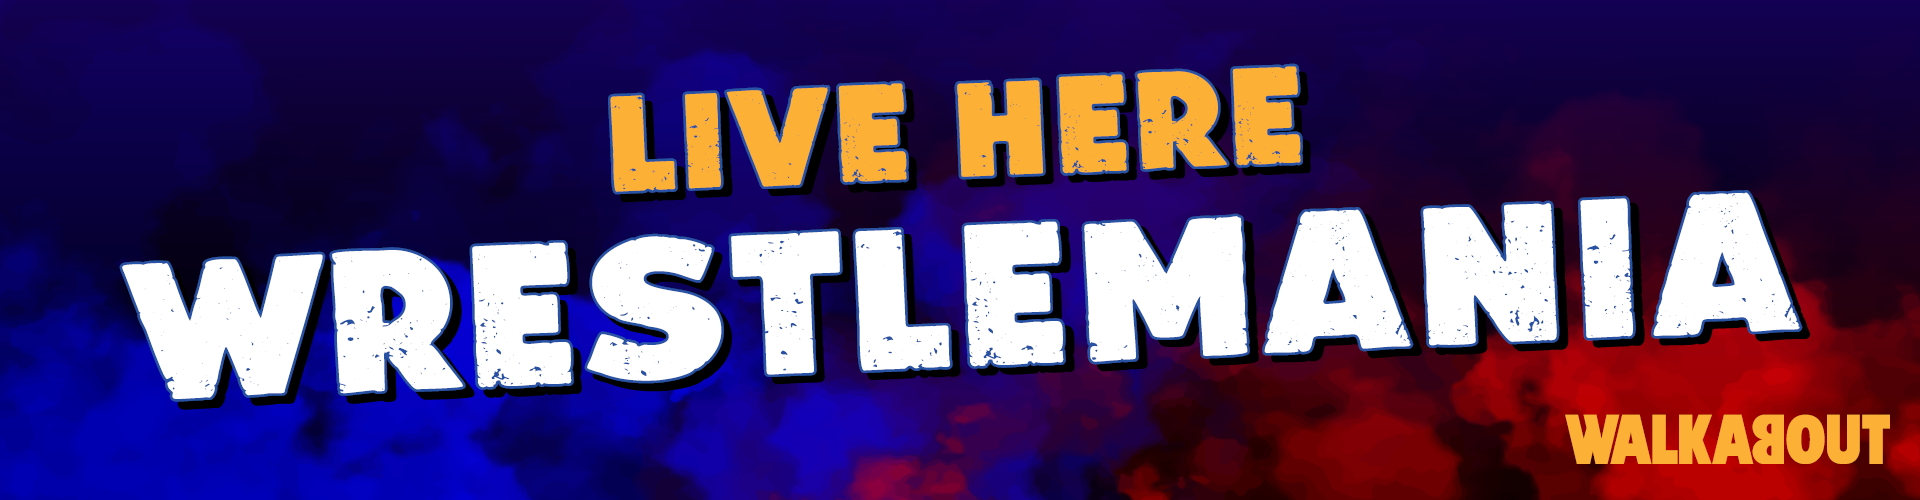 Watch WrestleMania XL live at Walkabout